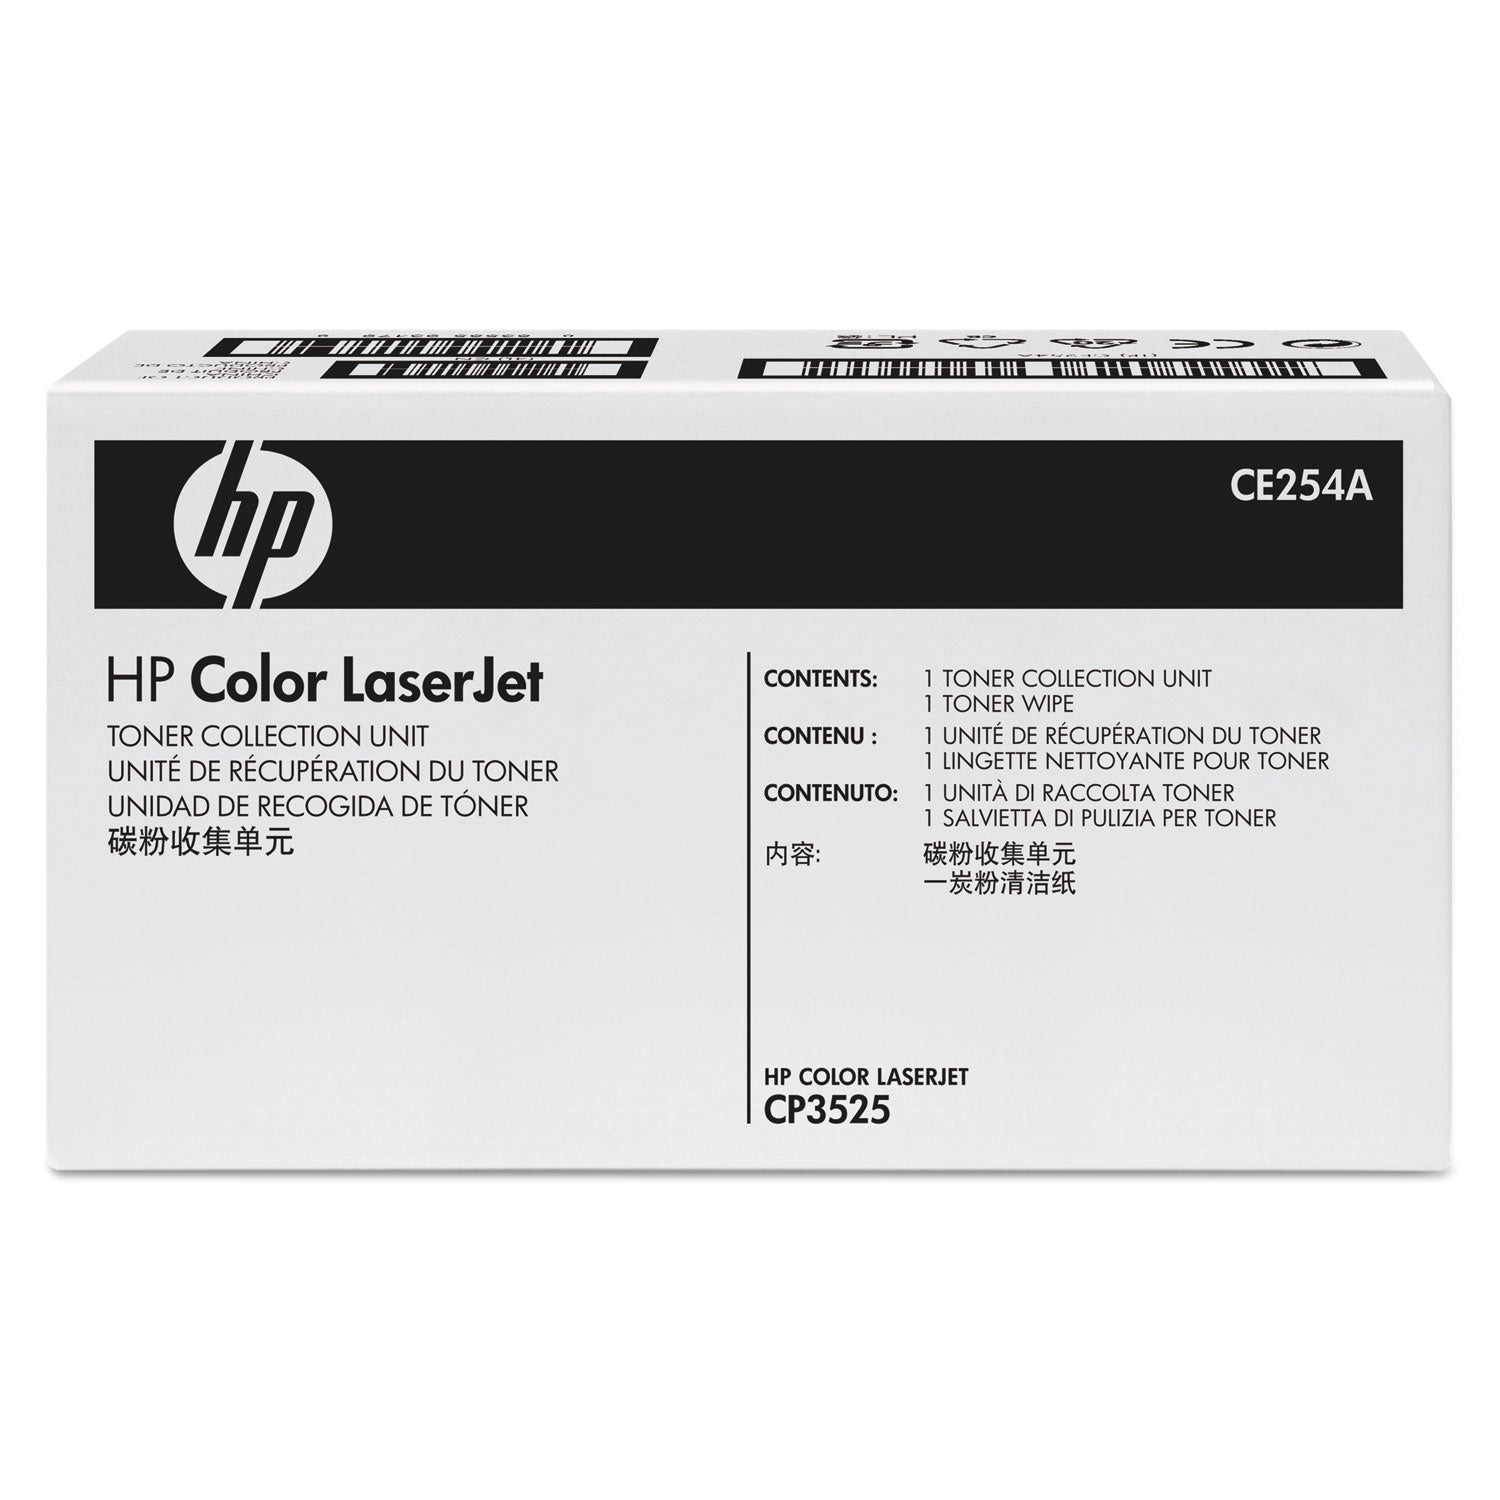 ce254a-hp-504a-toner-collection-unit-36000-page-yield_hewce254a - 1